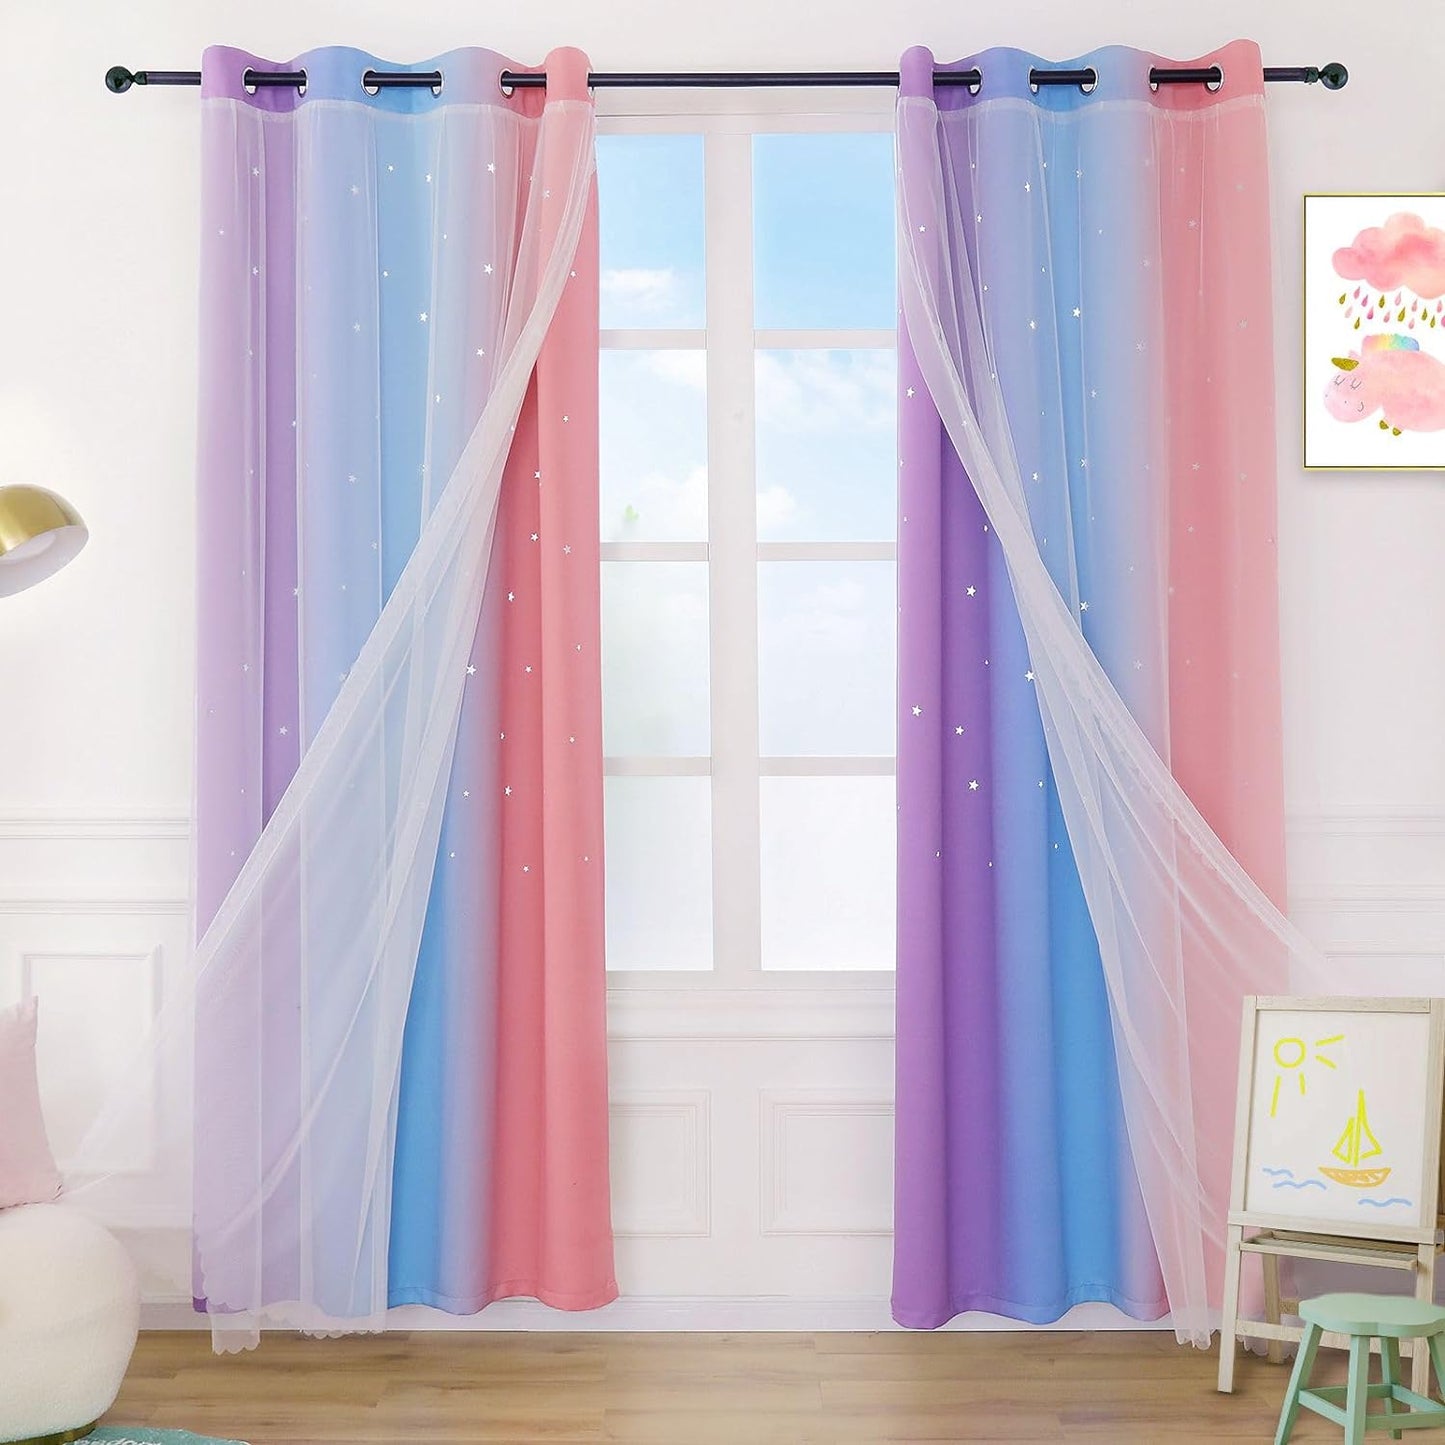 Anjee Rainbow Curtains for Girls Bedroom Double Layer Blackout Curtains Grommets Top Star Cutout Ombre Window Drapes with Sheer for Living Room 2 Panels in 52 X 84 Inch Length, Pink and Yellow  Anjee Purple/Blue/Pink W52" X L95" 